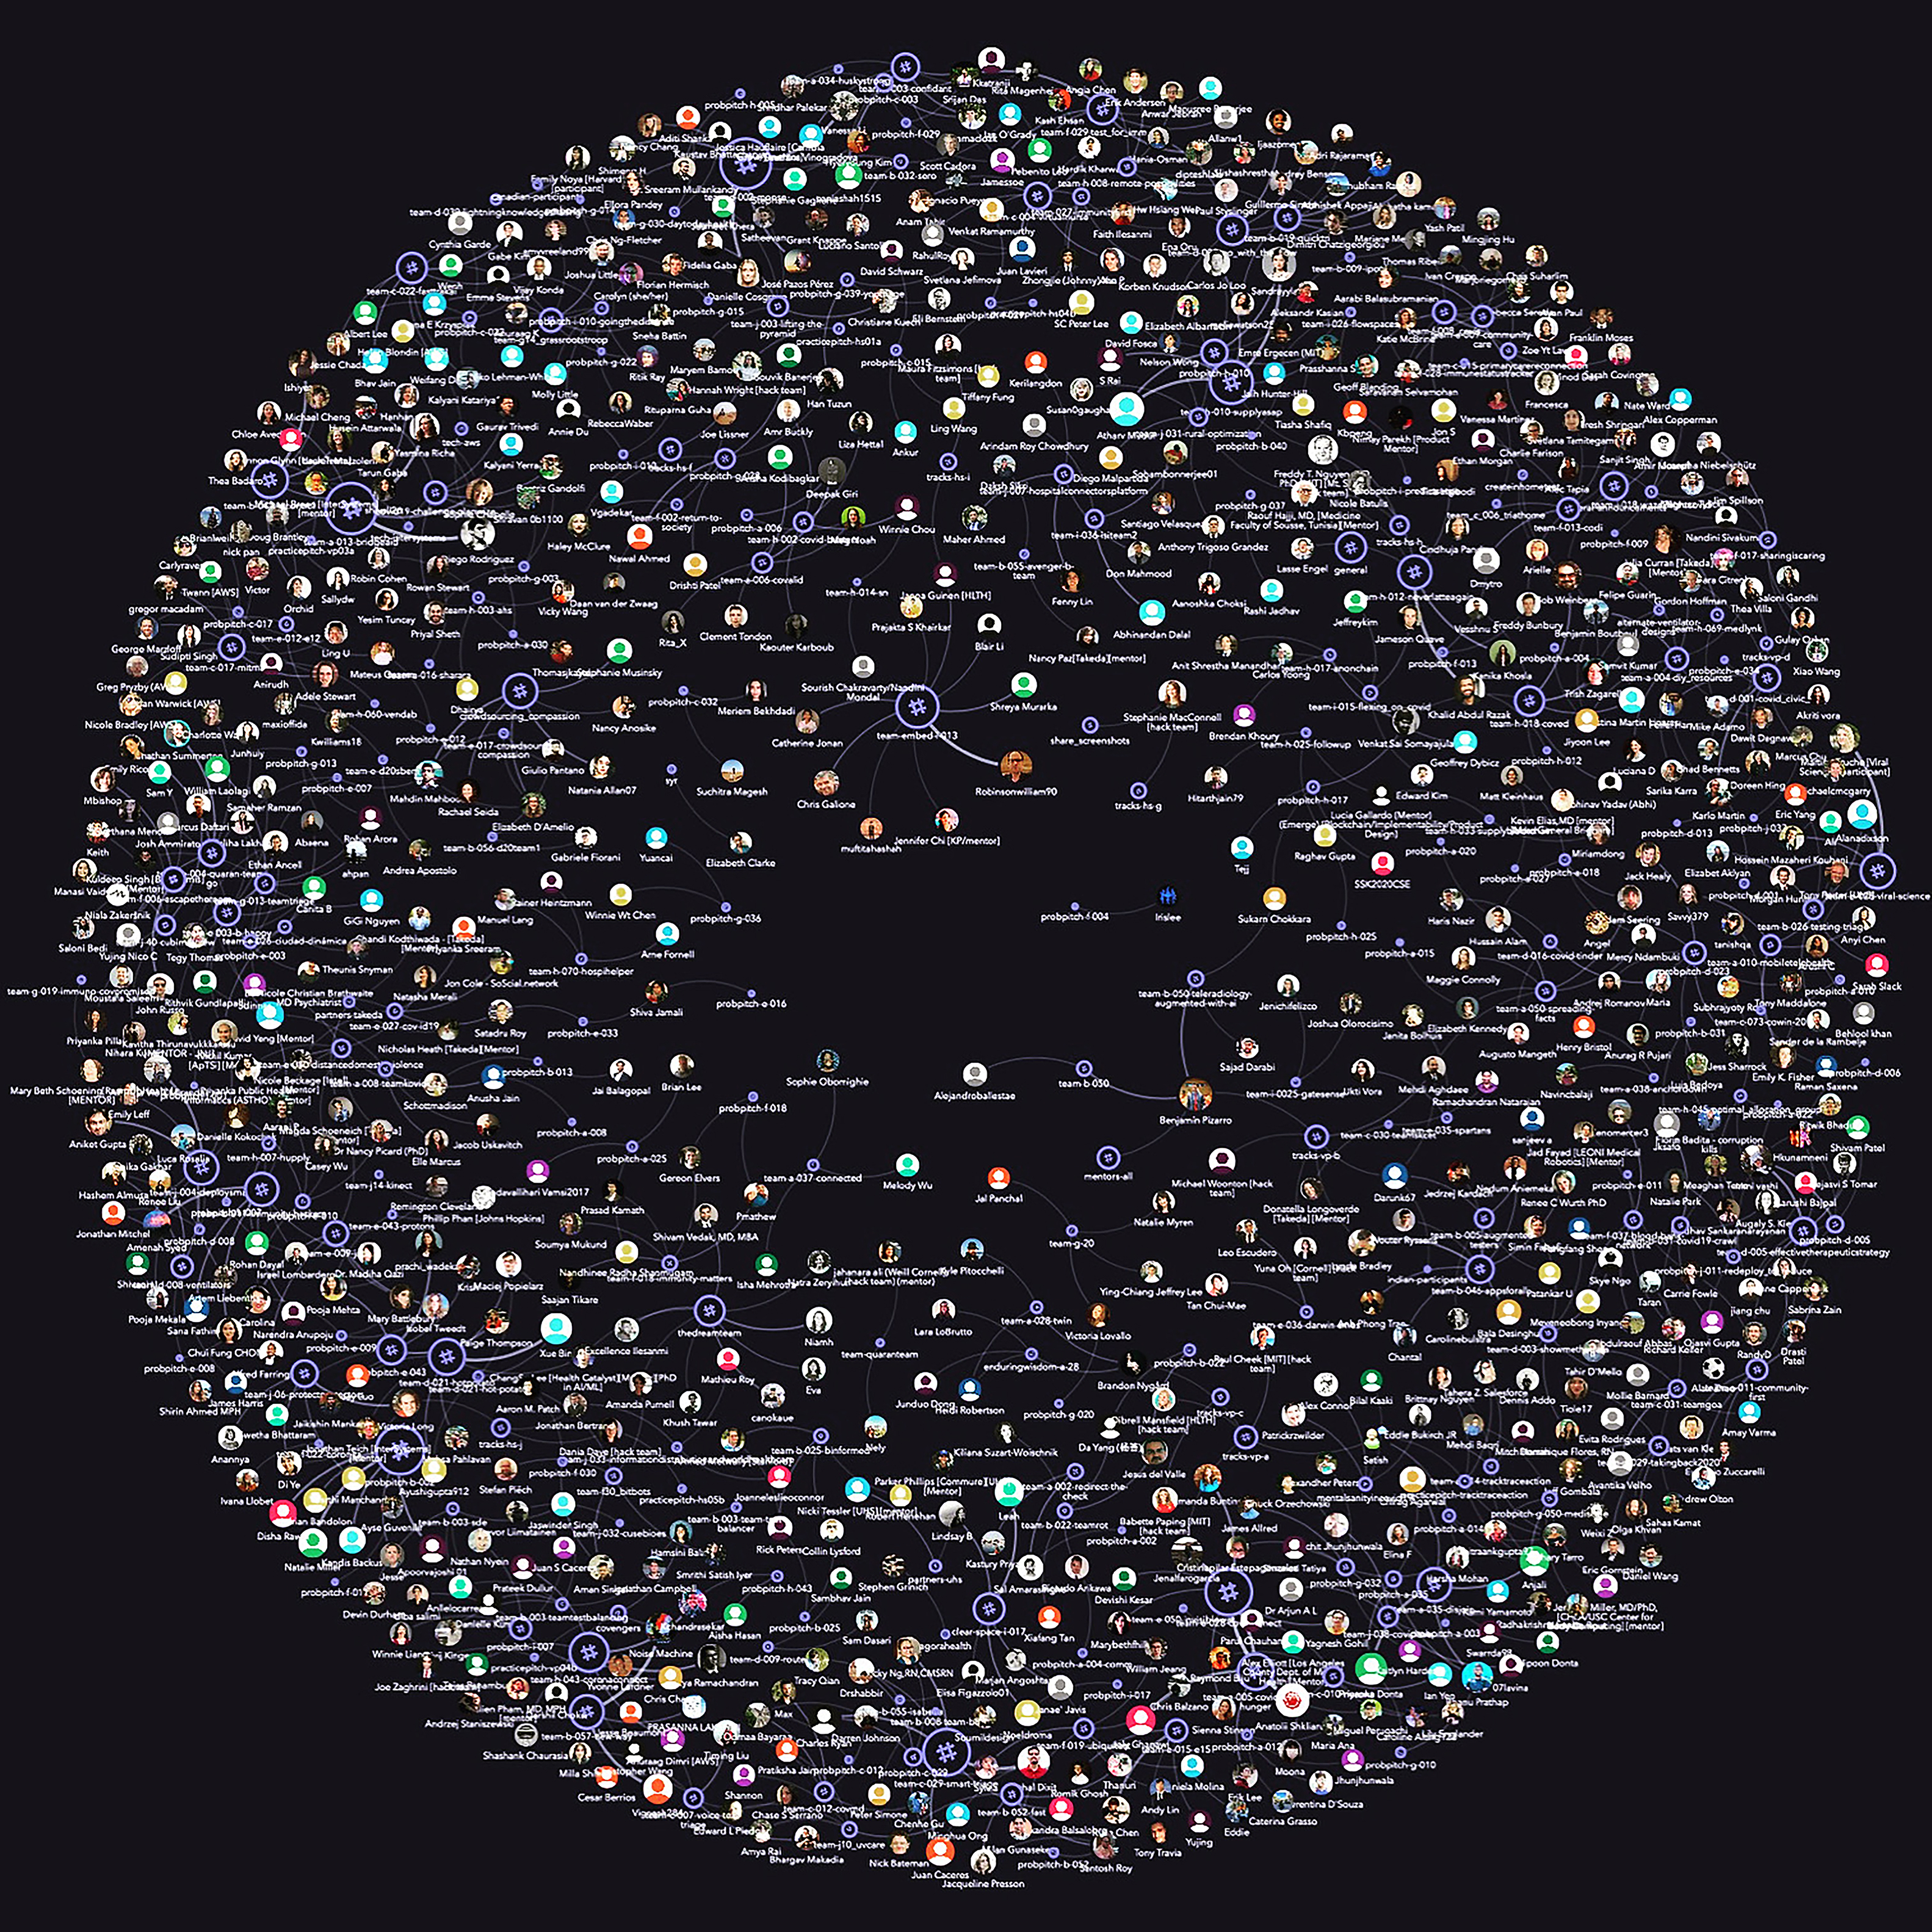 Sphere-shaped graphic shows network of partners and collaborators from the MIT Covid-19 Challenge